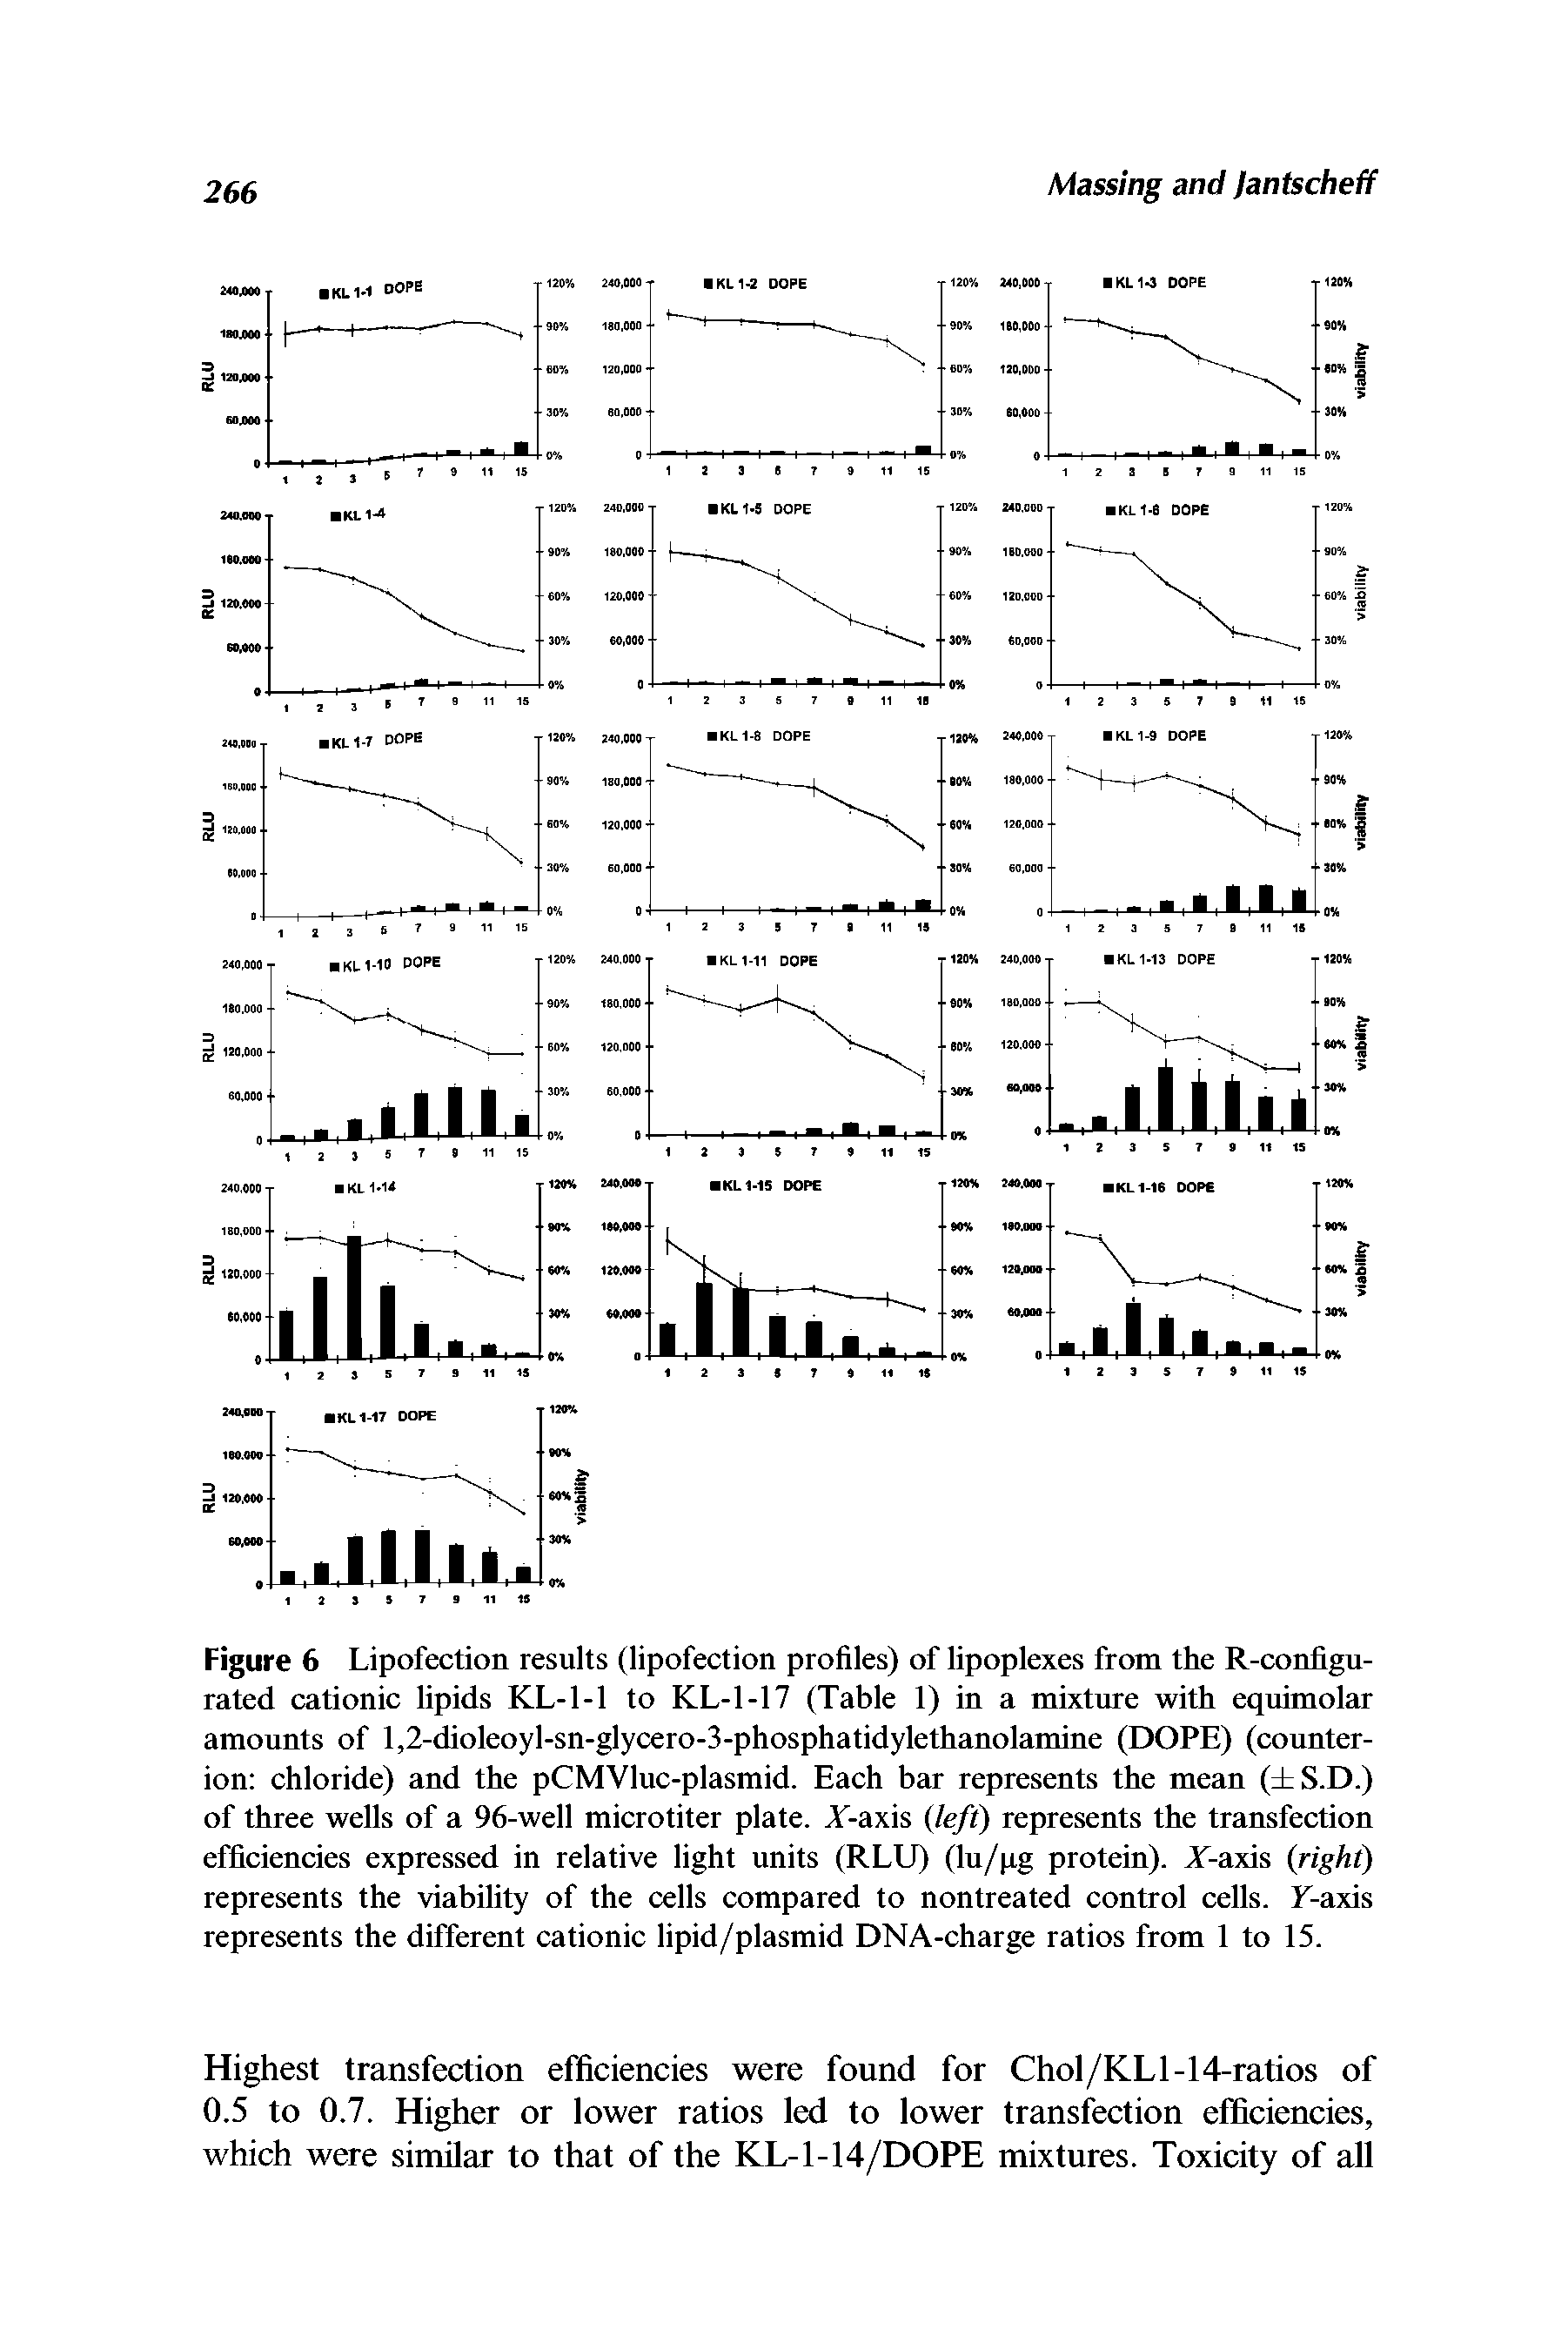 Figure 6 Lipofection results (lipofection profiles) of lipoplexes from the R-configu-rated cationic lipids KL-1-1 to KL-1-17 (Table 1) in a mixture with equimolar amounts of l,2-dioleoyl-sn-glycero-3-phosphatidylethanolamine (DOPE) (counterion chloride) and the pCMVluc-plasmid. Each bar represents the mean ( S.D.) of three wells of a 96-well microtiter plate. T-axis (left) represents the transfection efficiencies expressed in relative light units (RLU) (lu/pg protein). X-axis (right) represents the viability of the cells compared to nontreated control cells. F-axis represents the different cationic lipid/plasmid DNA-charge ratios from 1 to 15.